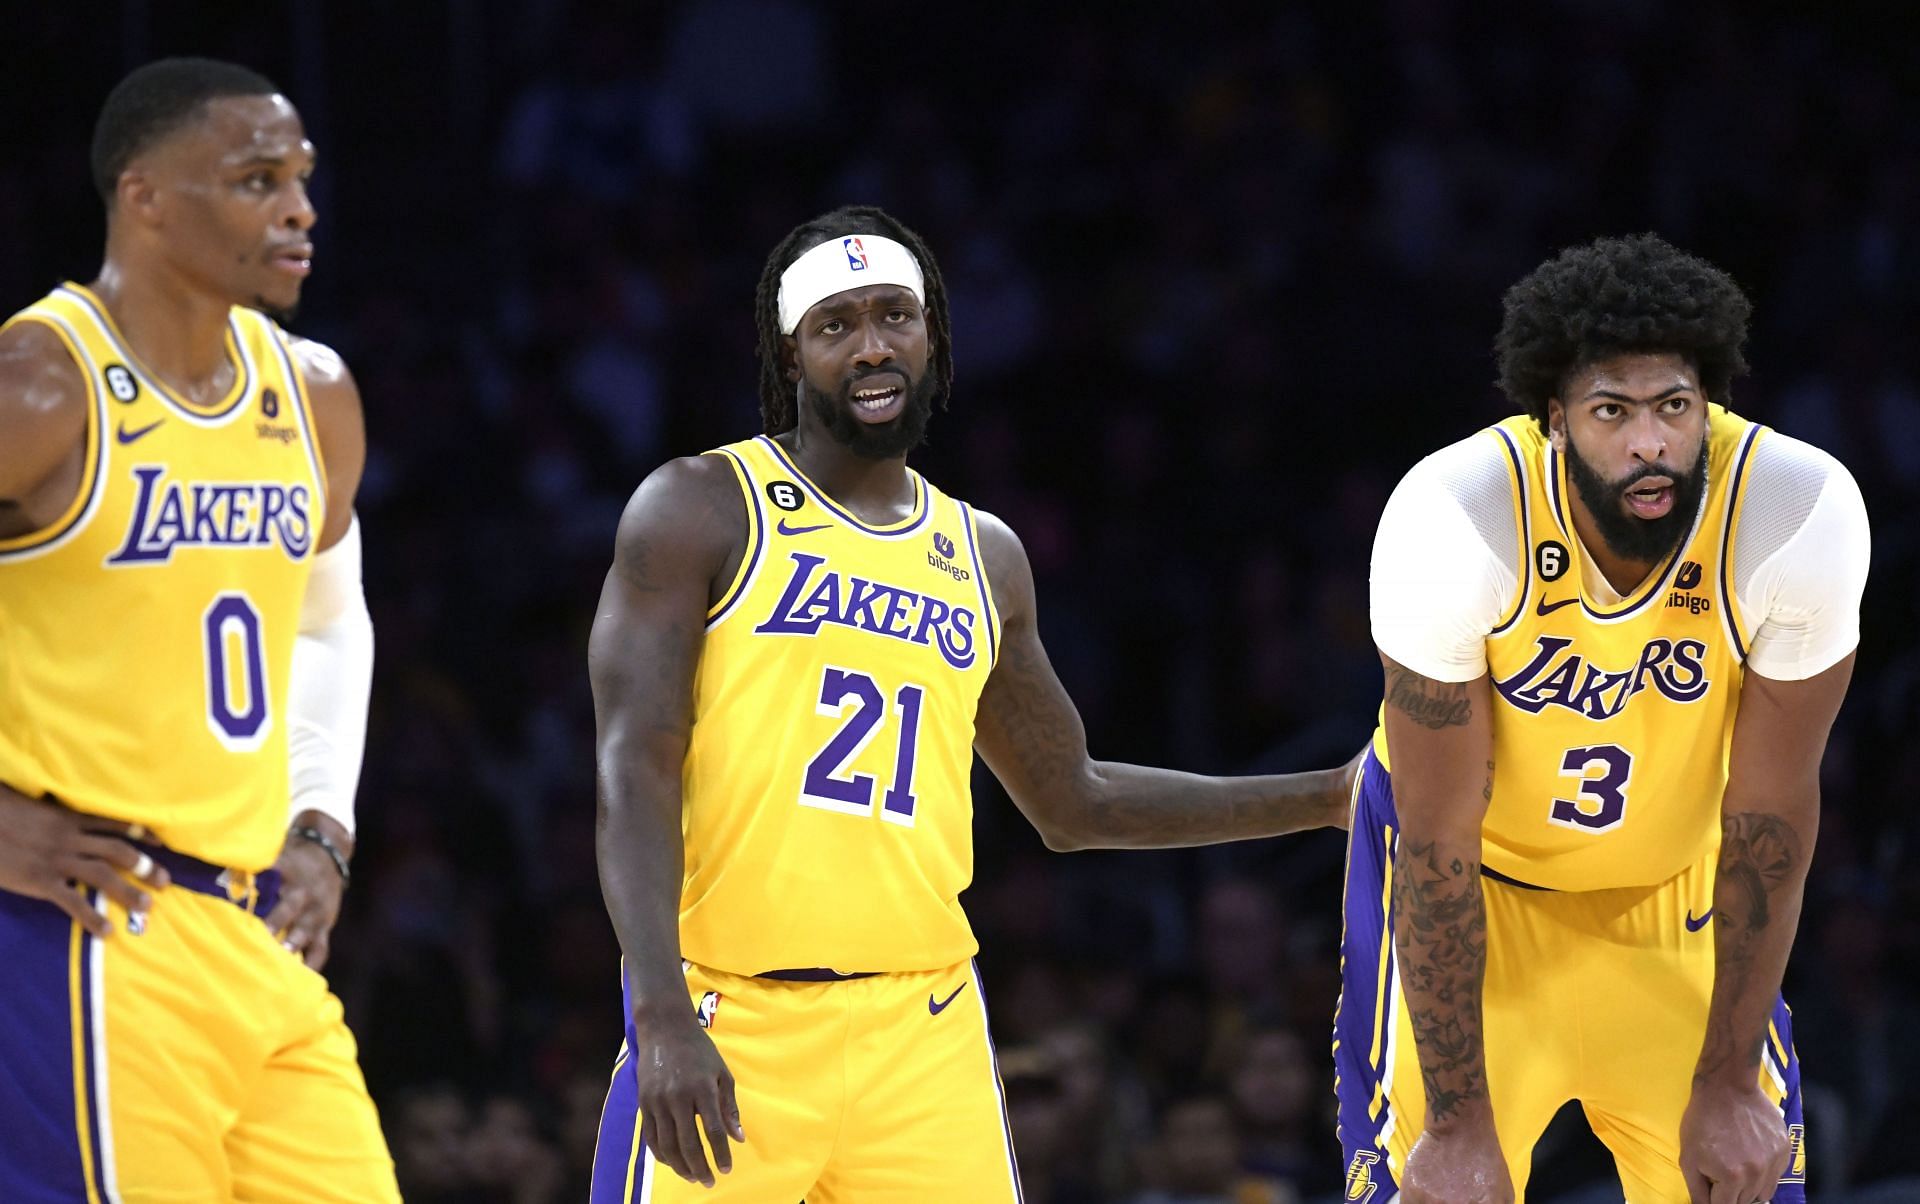 Lakers embrace continuity and grinders, not stars, with that have one of  league's best offseasons - NBC Sports